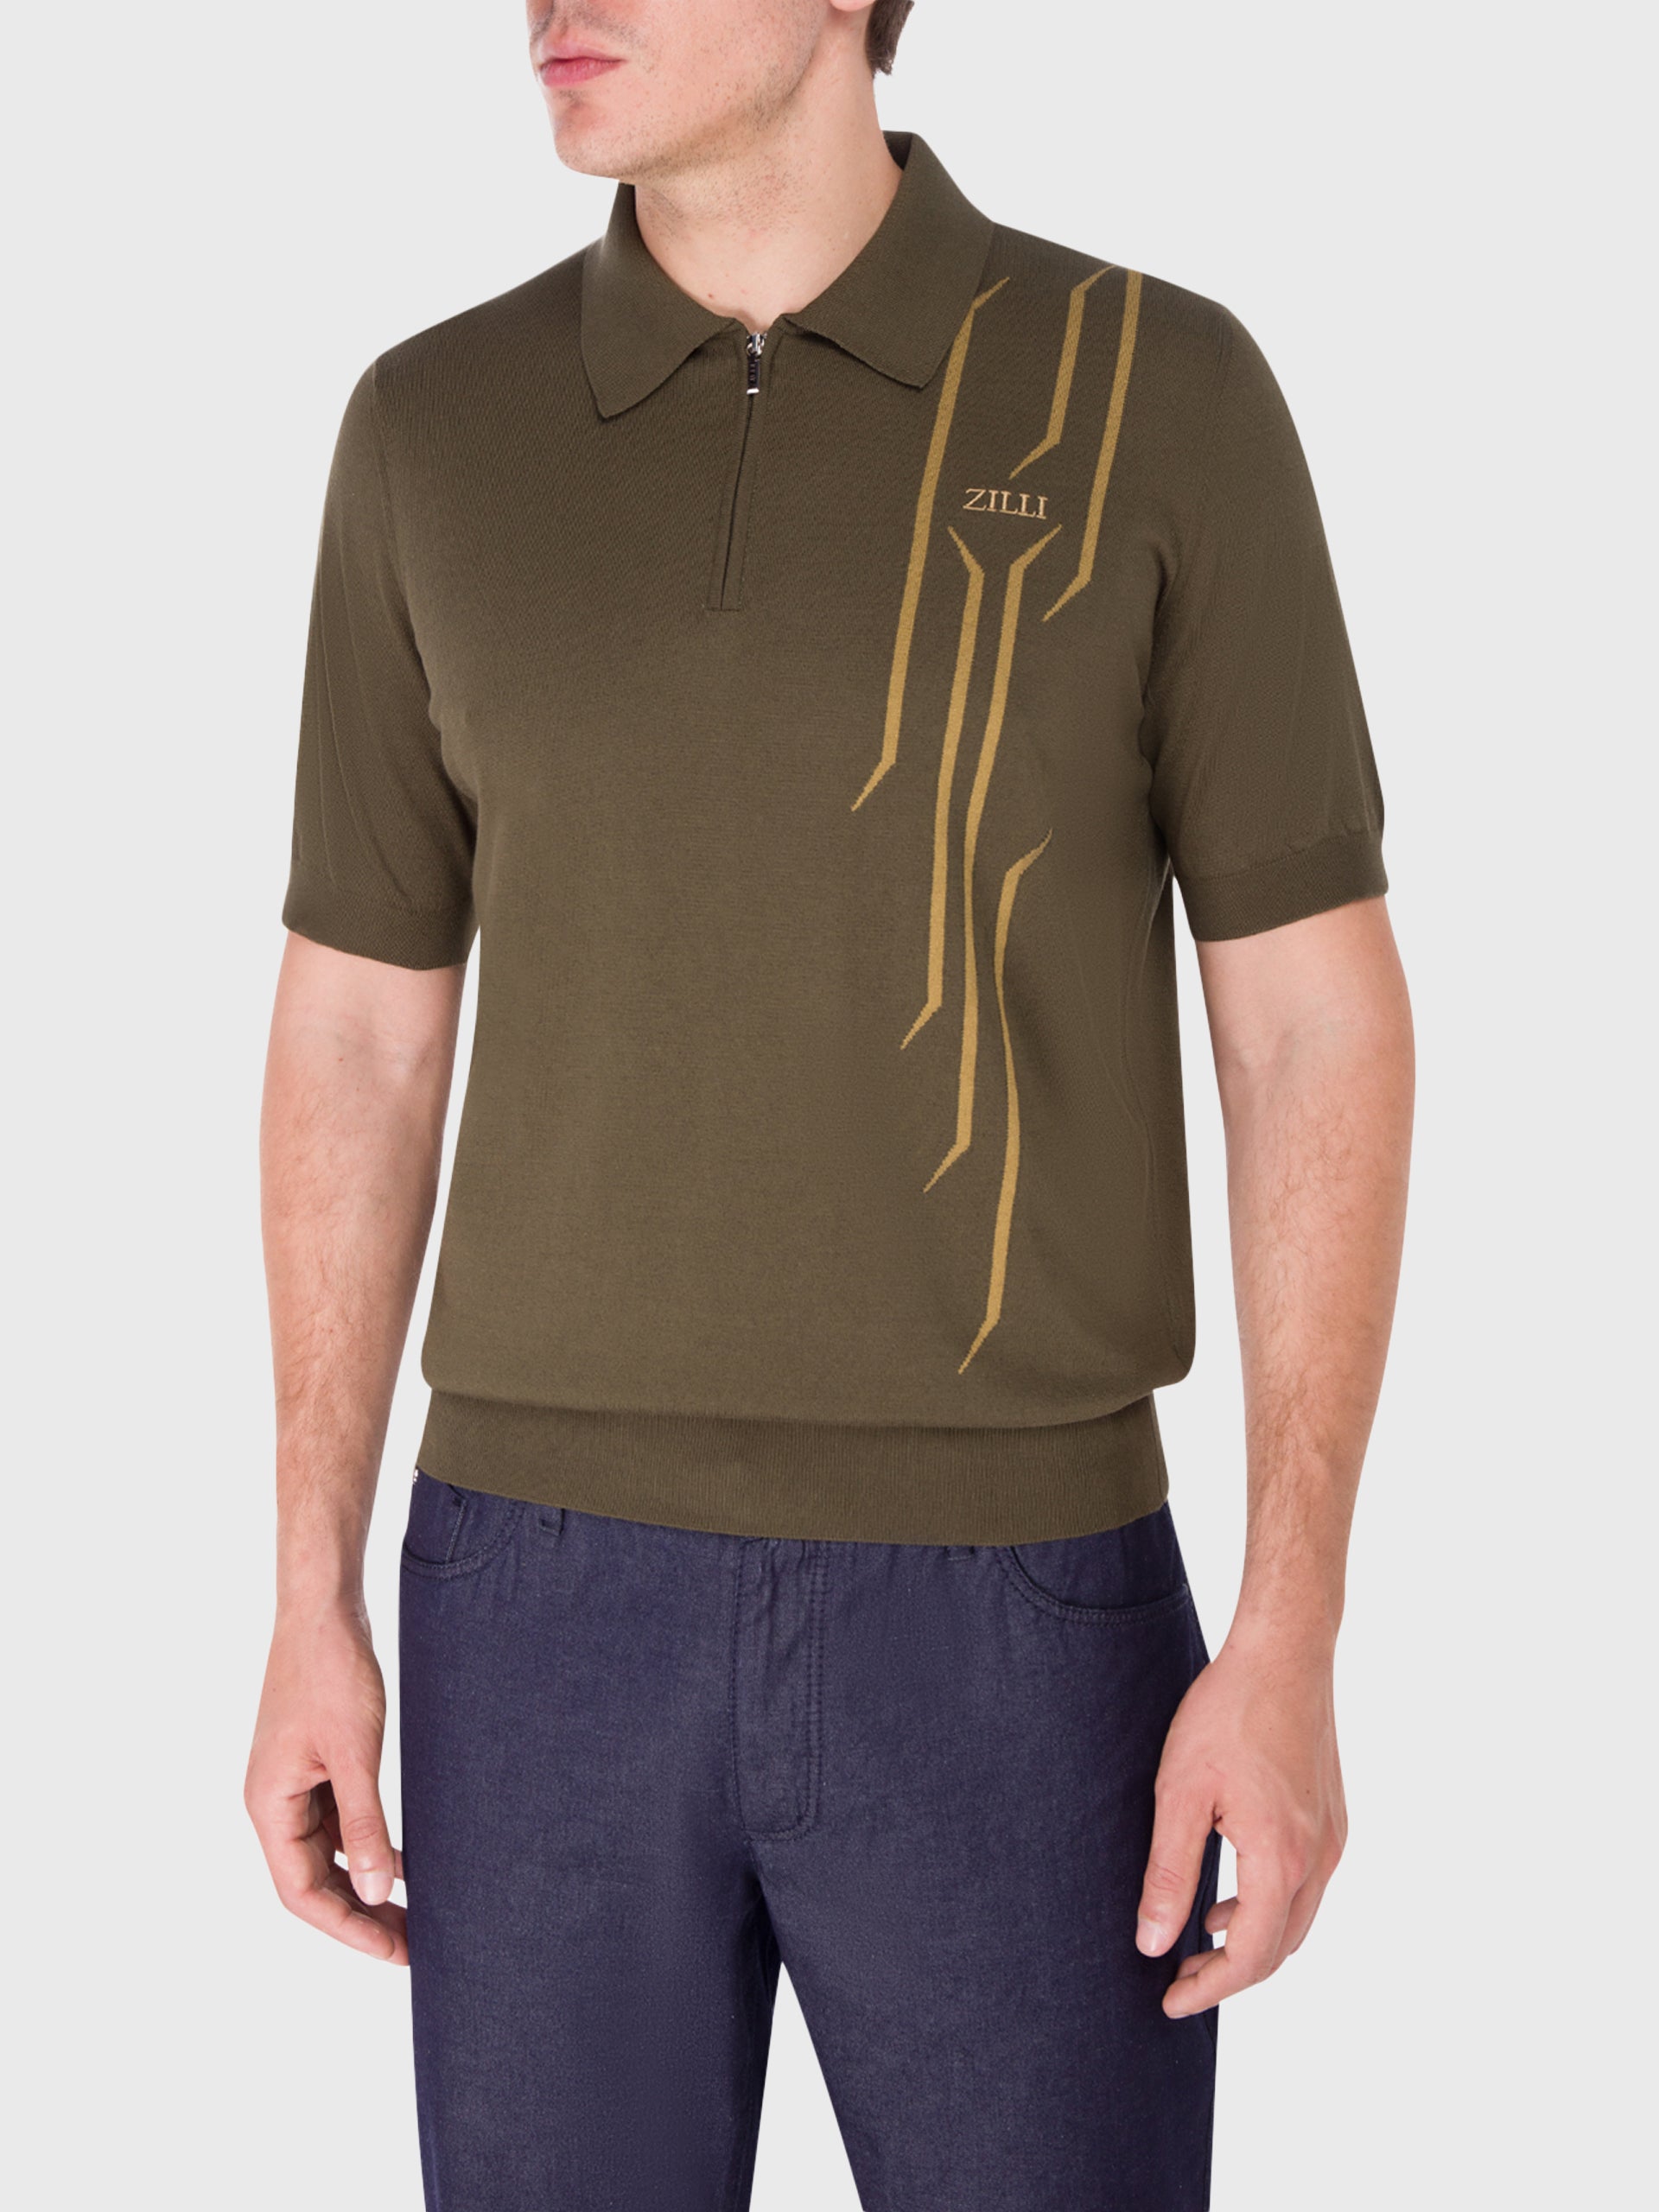 Zipped Polo Shirt with Zilli Lettering